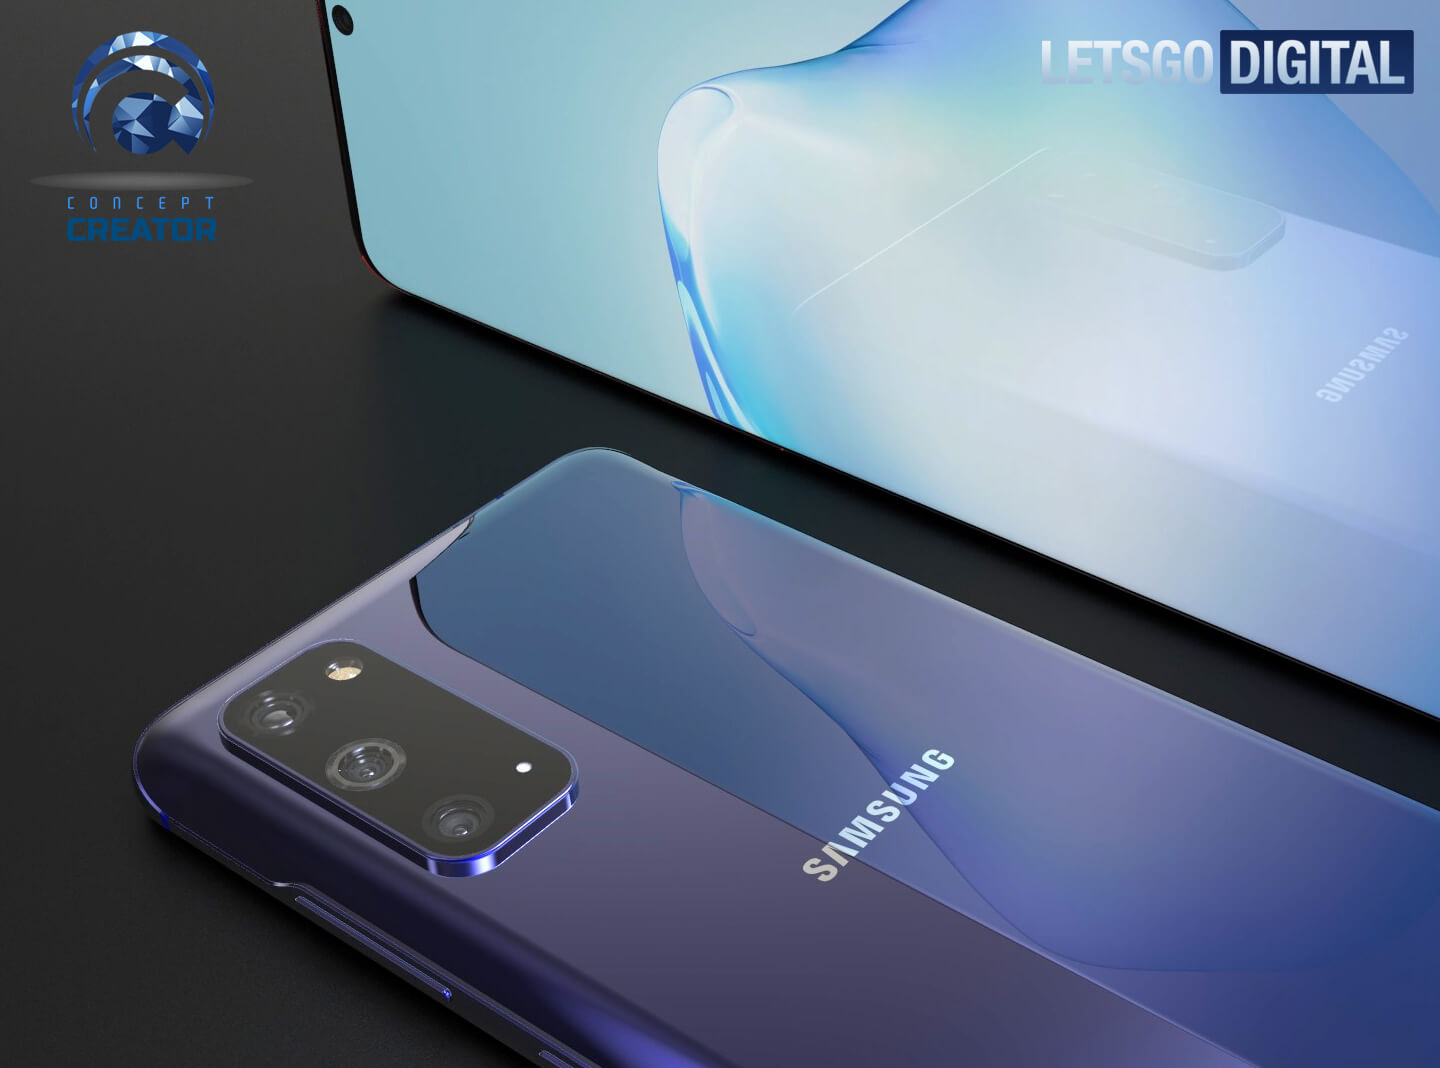 Samsung Galaxy S11+ could launch with 108MP ISOCELL Bright HM1 & under-screen selfie cameras